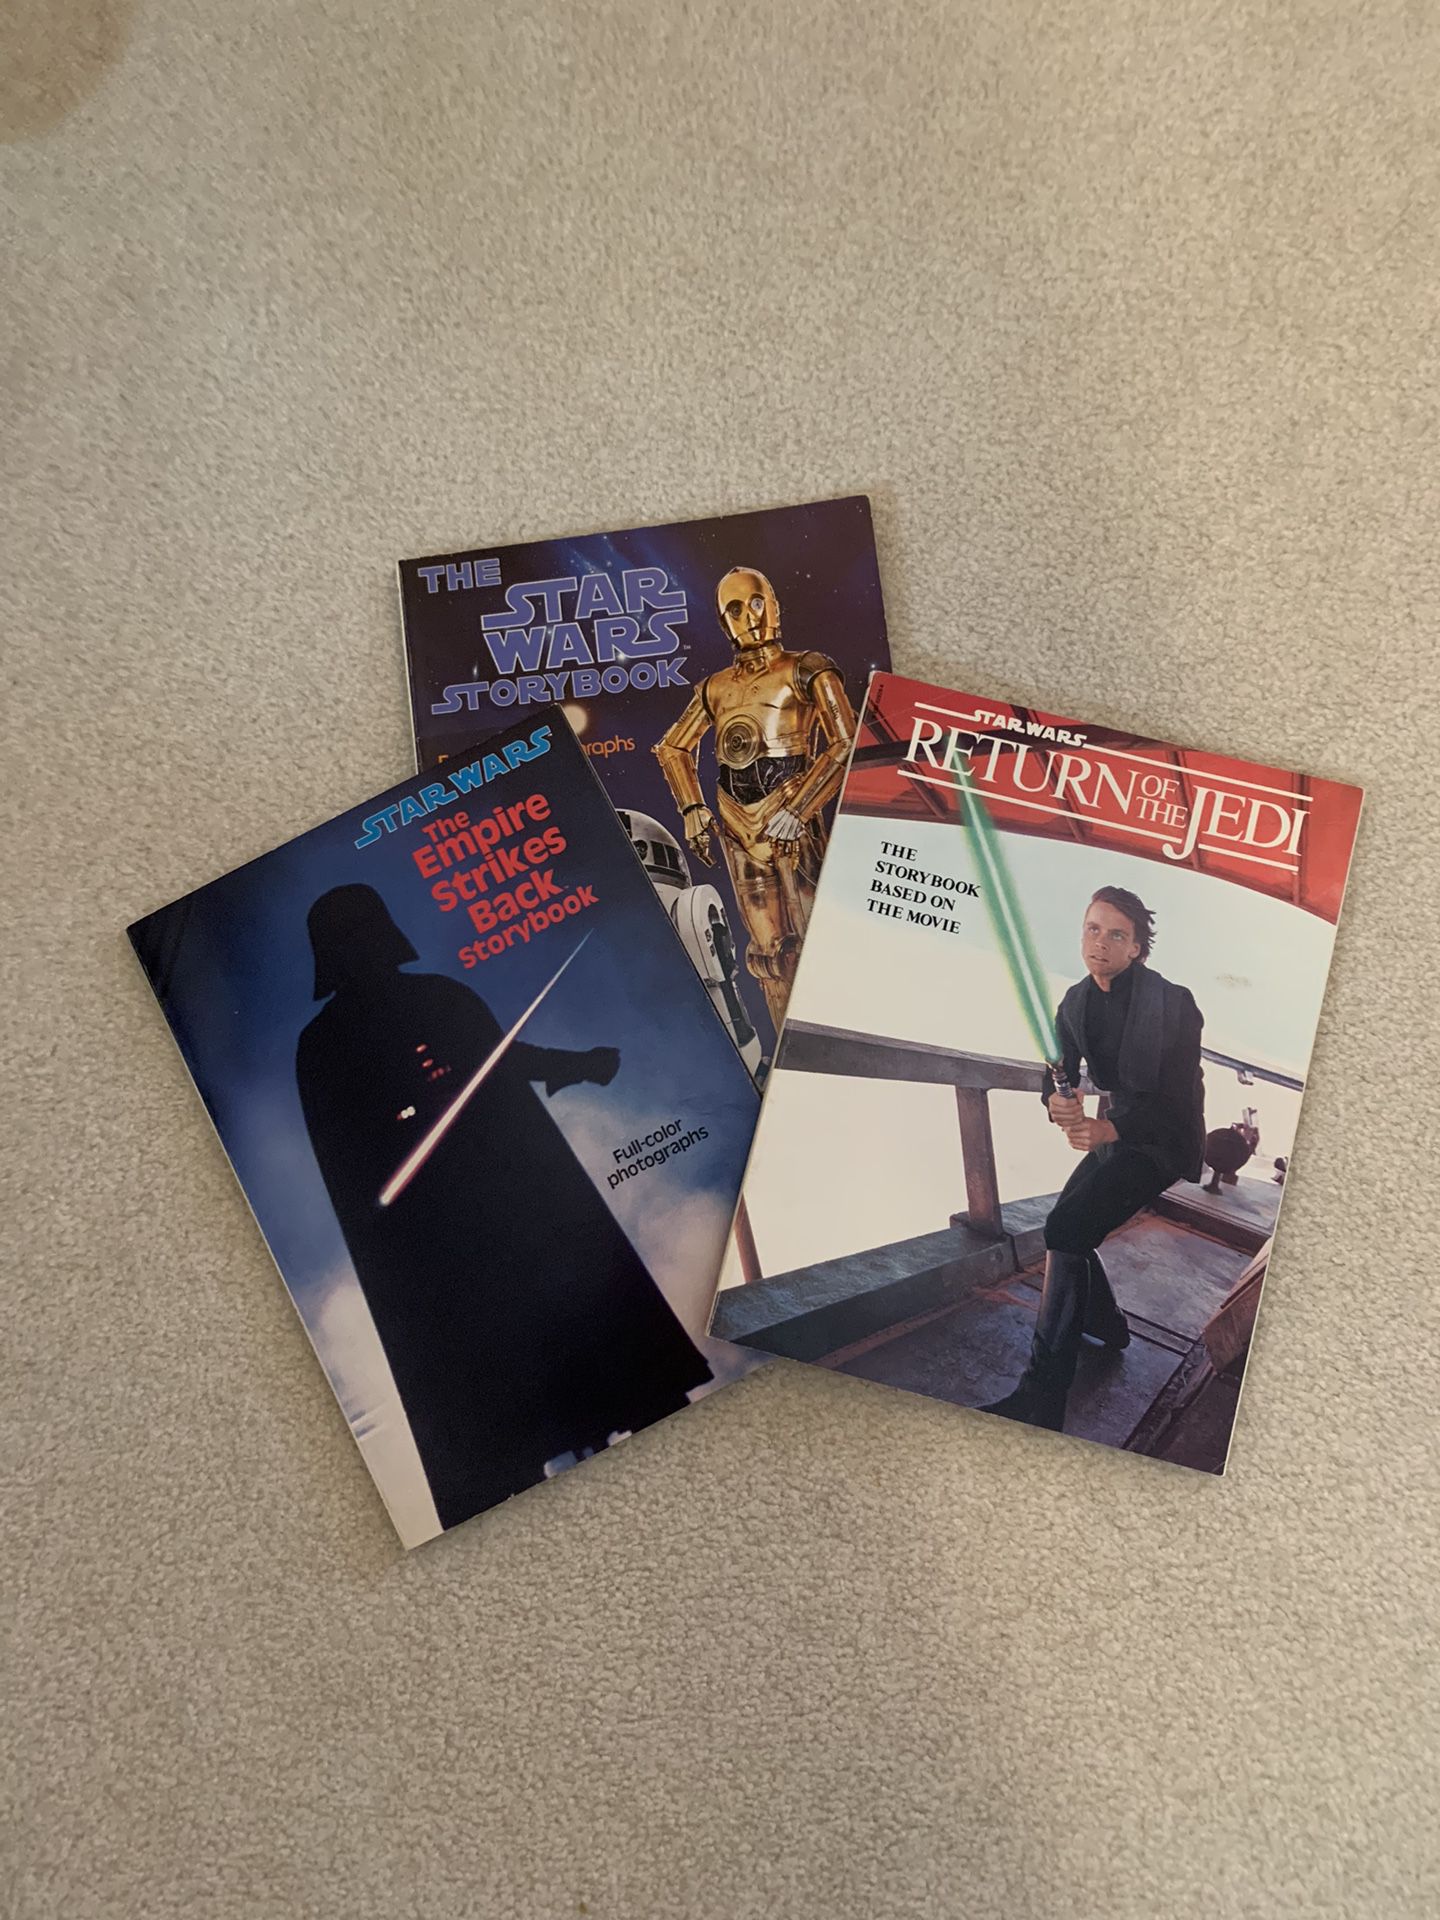 3 SOFTCOVER STORYBOOKS: STAR WARS, THE EMPIRE STRIKES BACK and RETURN OF THE JEDI